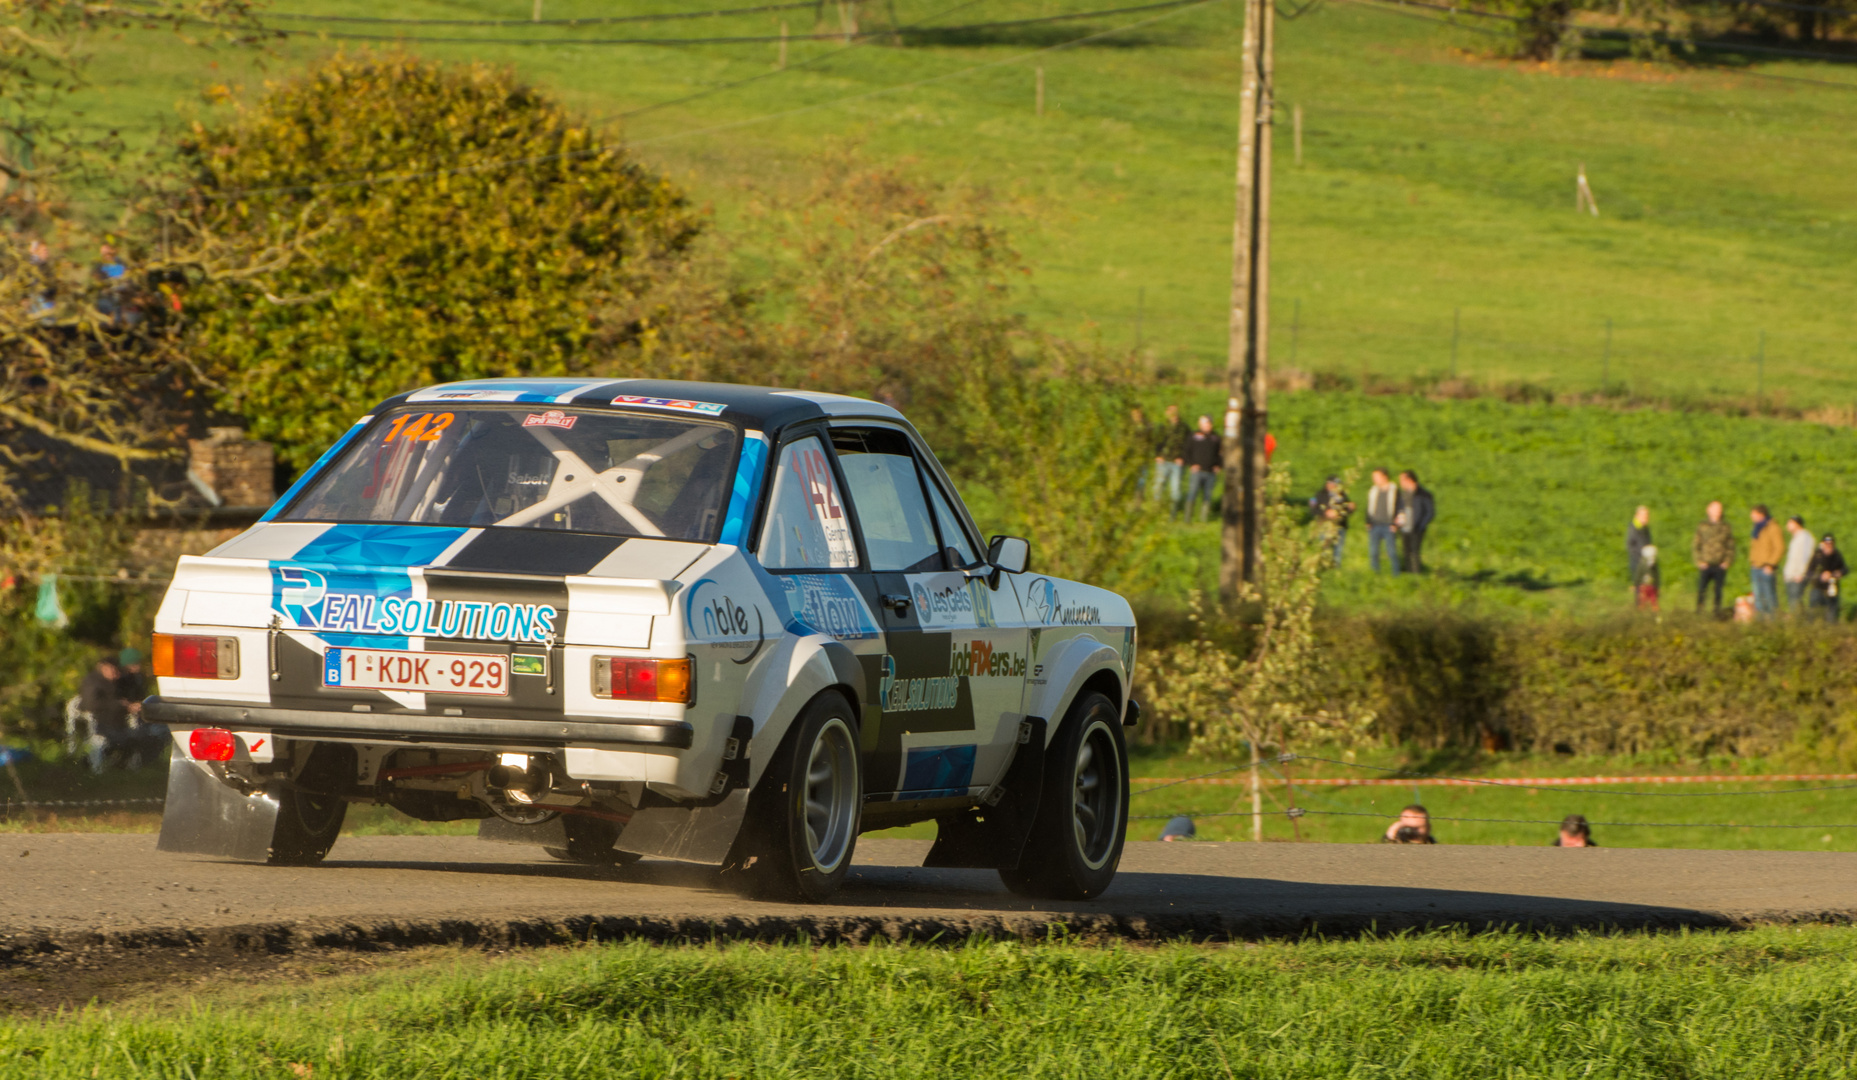 Ford Escort at the 2018 Rallye du Condroz Part VII